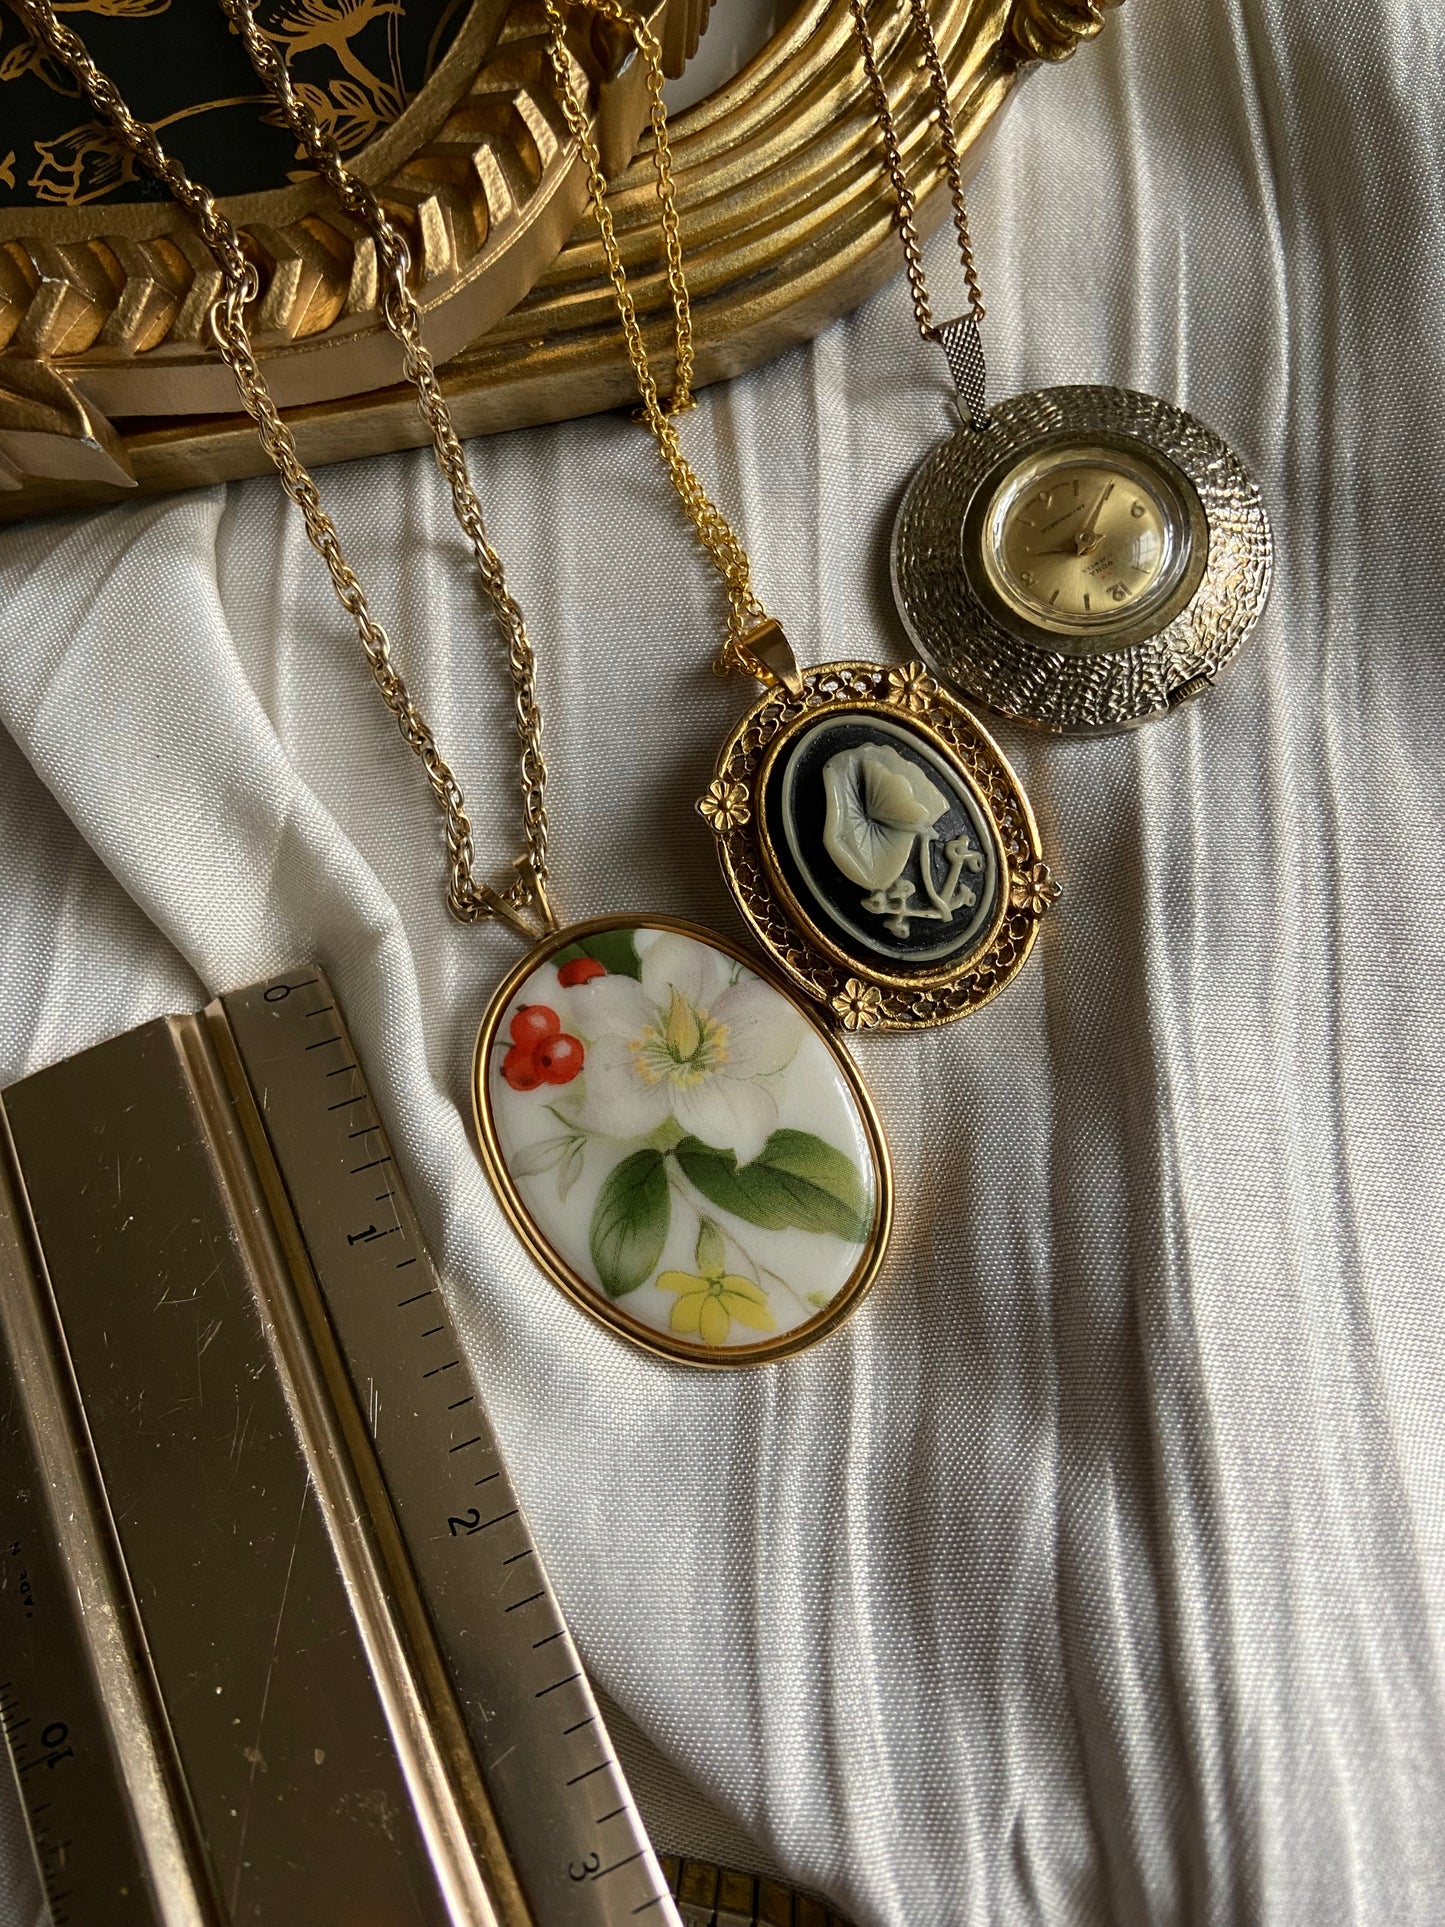 One-of-one | Vintage Necklaces Pocket Watch Cameo Porcelain Flower